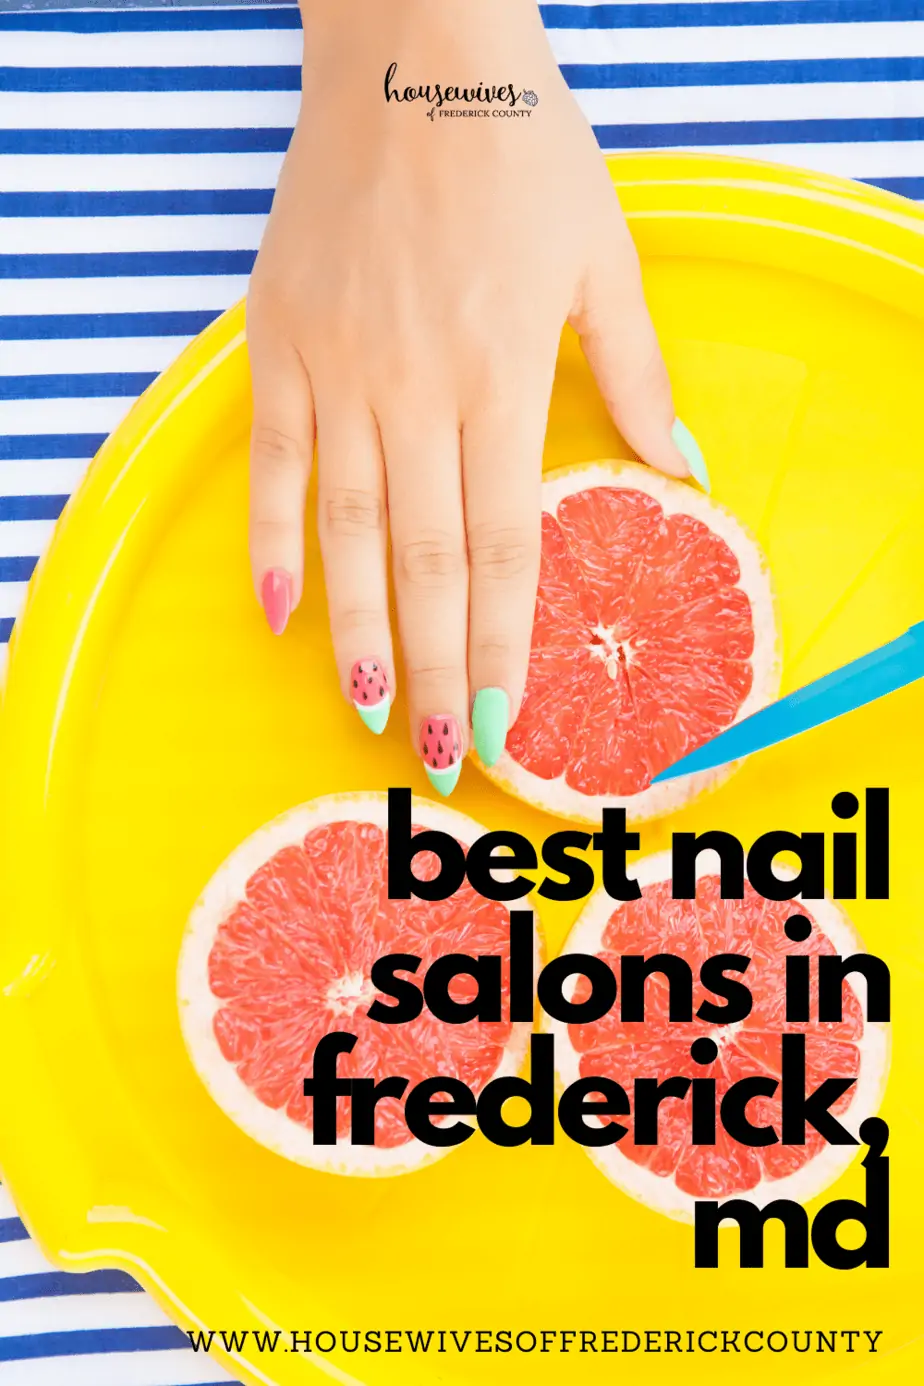 2021 Best Nail Salons in Frederick Md: Hands Down